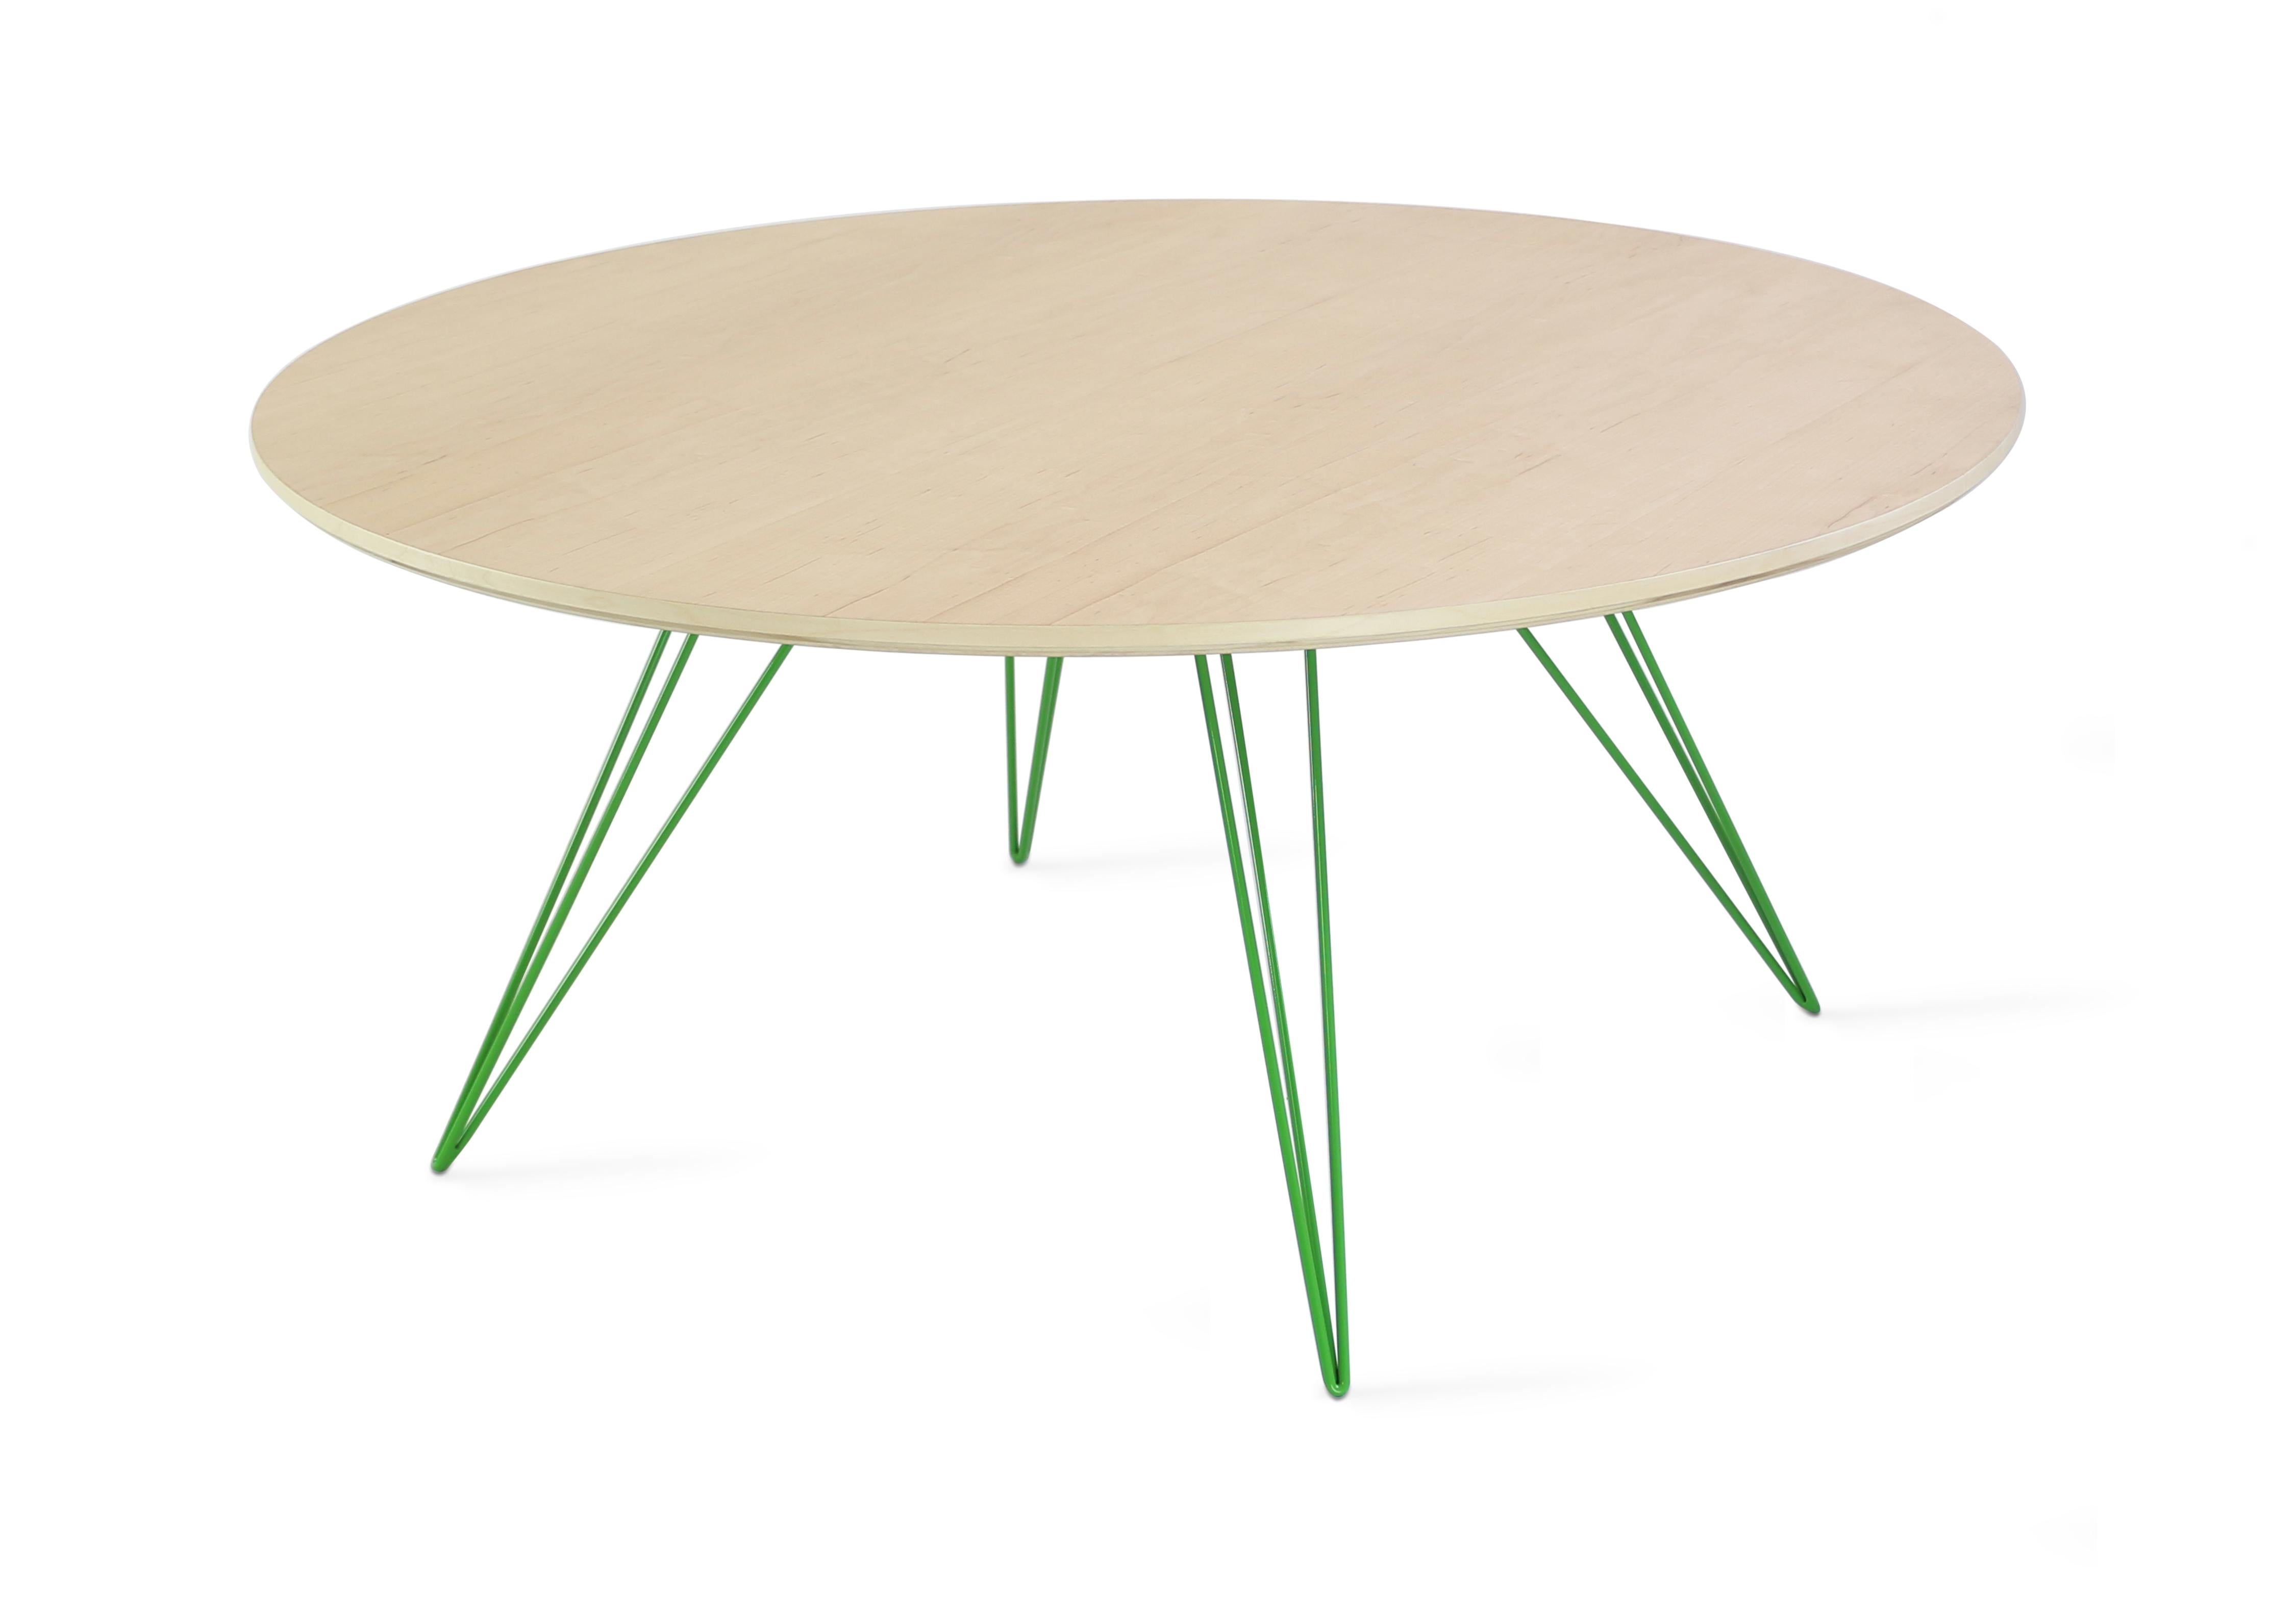 A thin, elegant and light table that can be customized to any shape, size and color desired. This handcrafted item perfectly blends industrial hairpin legs with a beveled wooden top. The irregular beauty of its natural wood combined with its simple